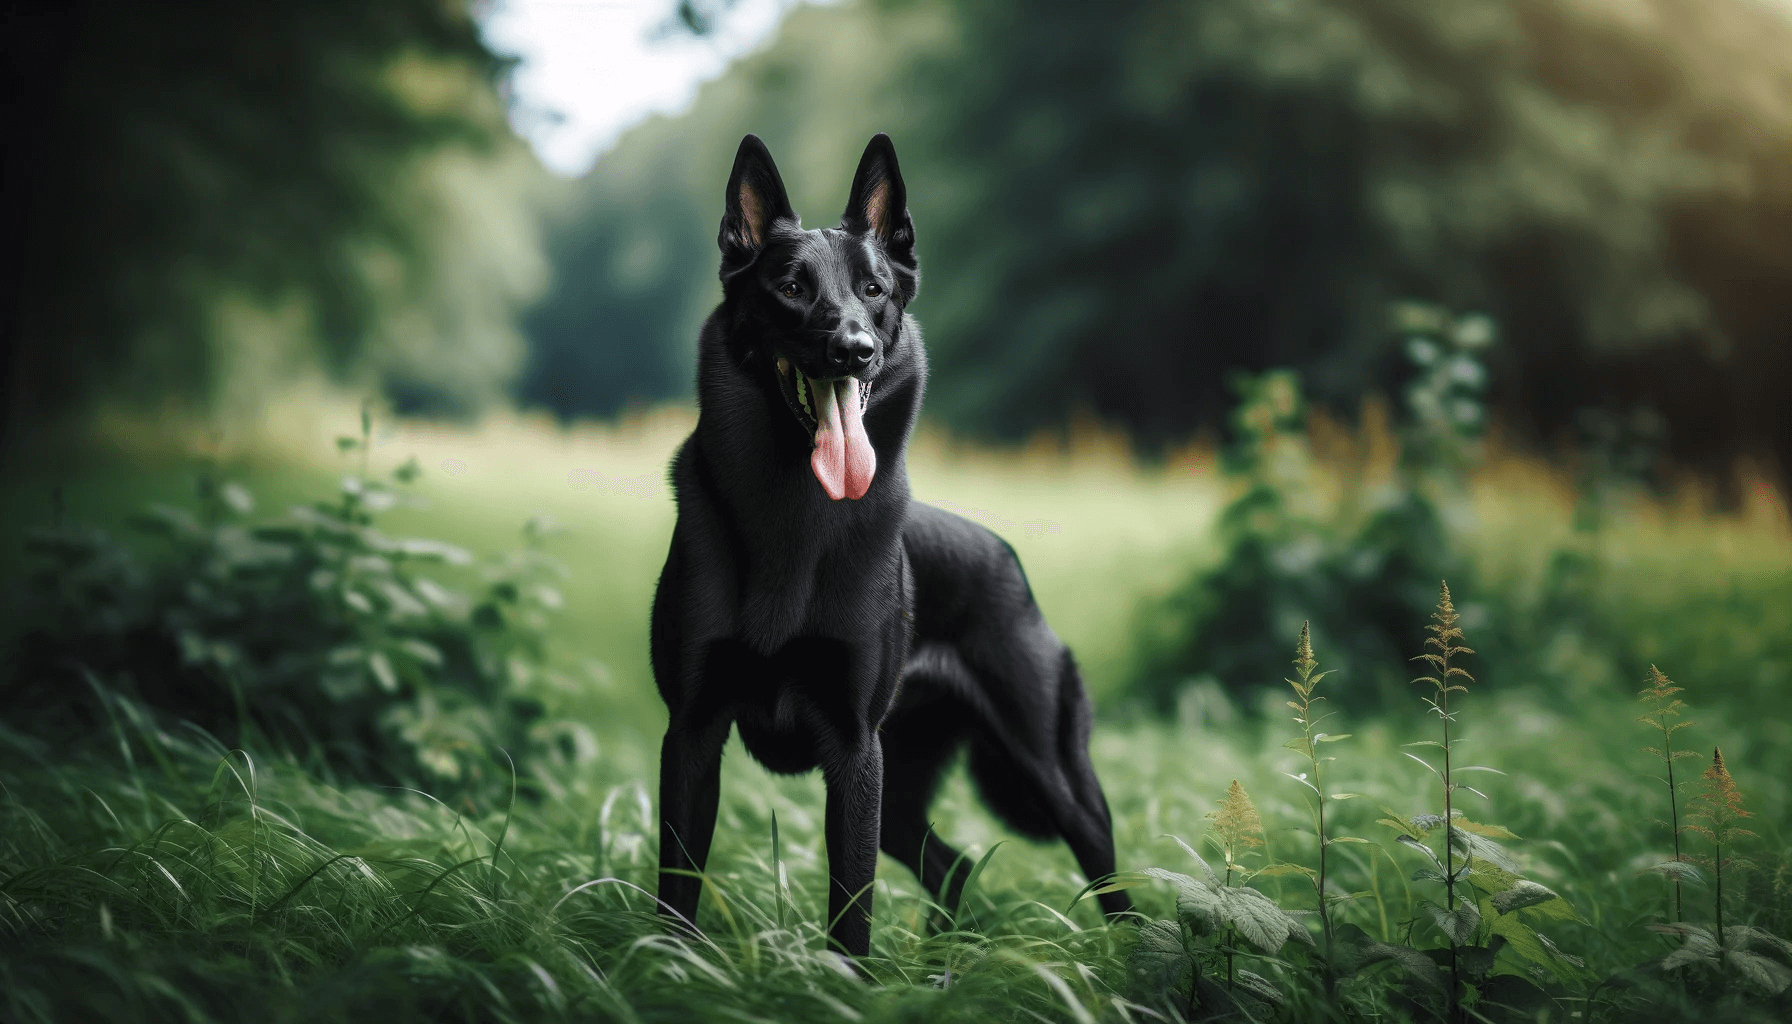 Rare Black Belgian Malinois standing in a natural grassy environment with its tongue out, suggesting it might be panting or has been active.